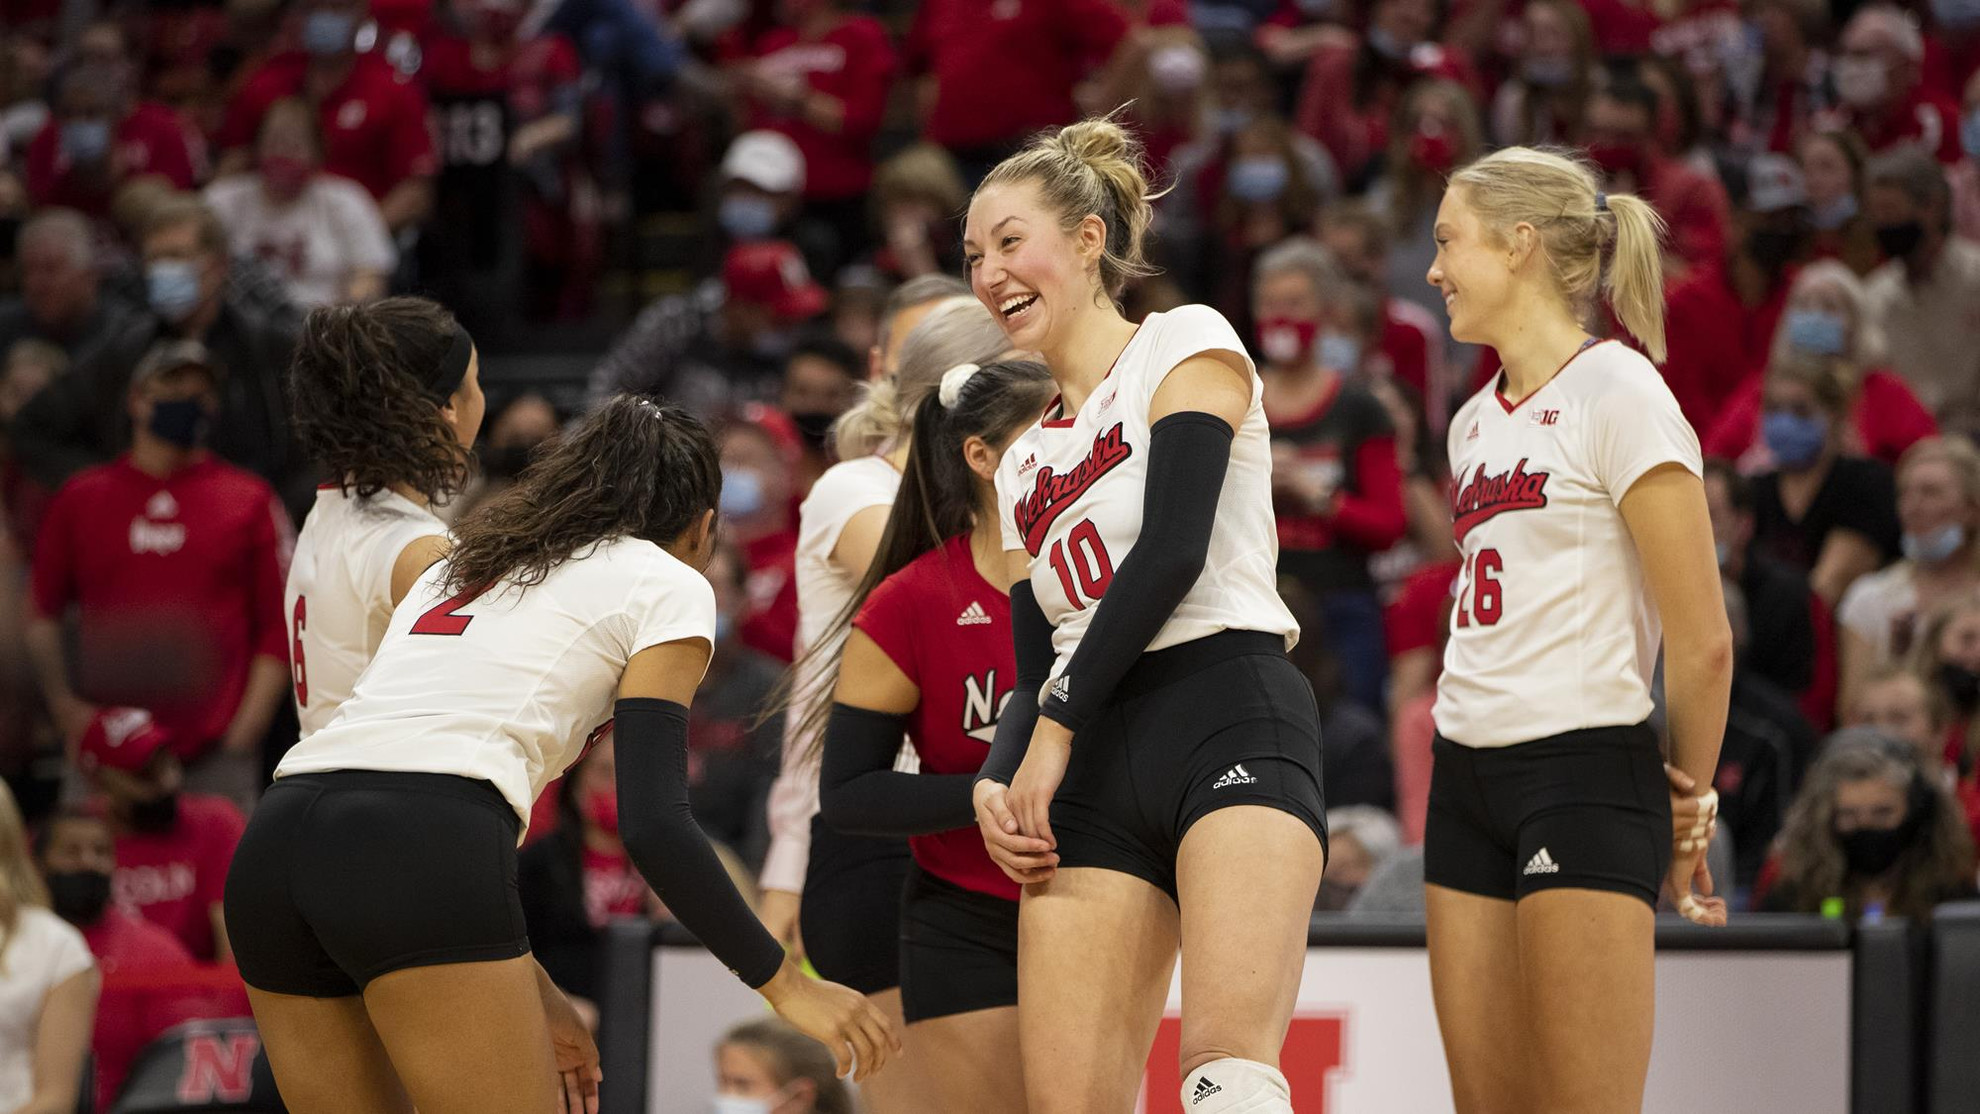 Huskers Clash With Florida State in NCAA Second Round - University of Nebraska